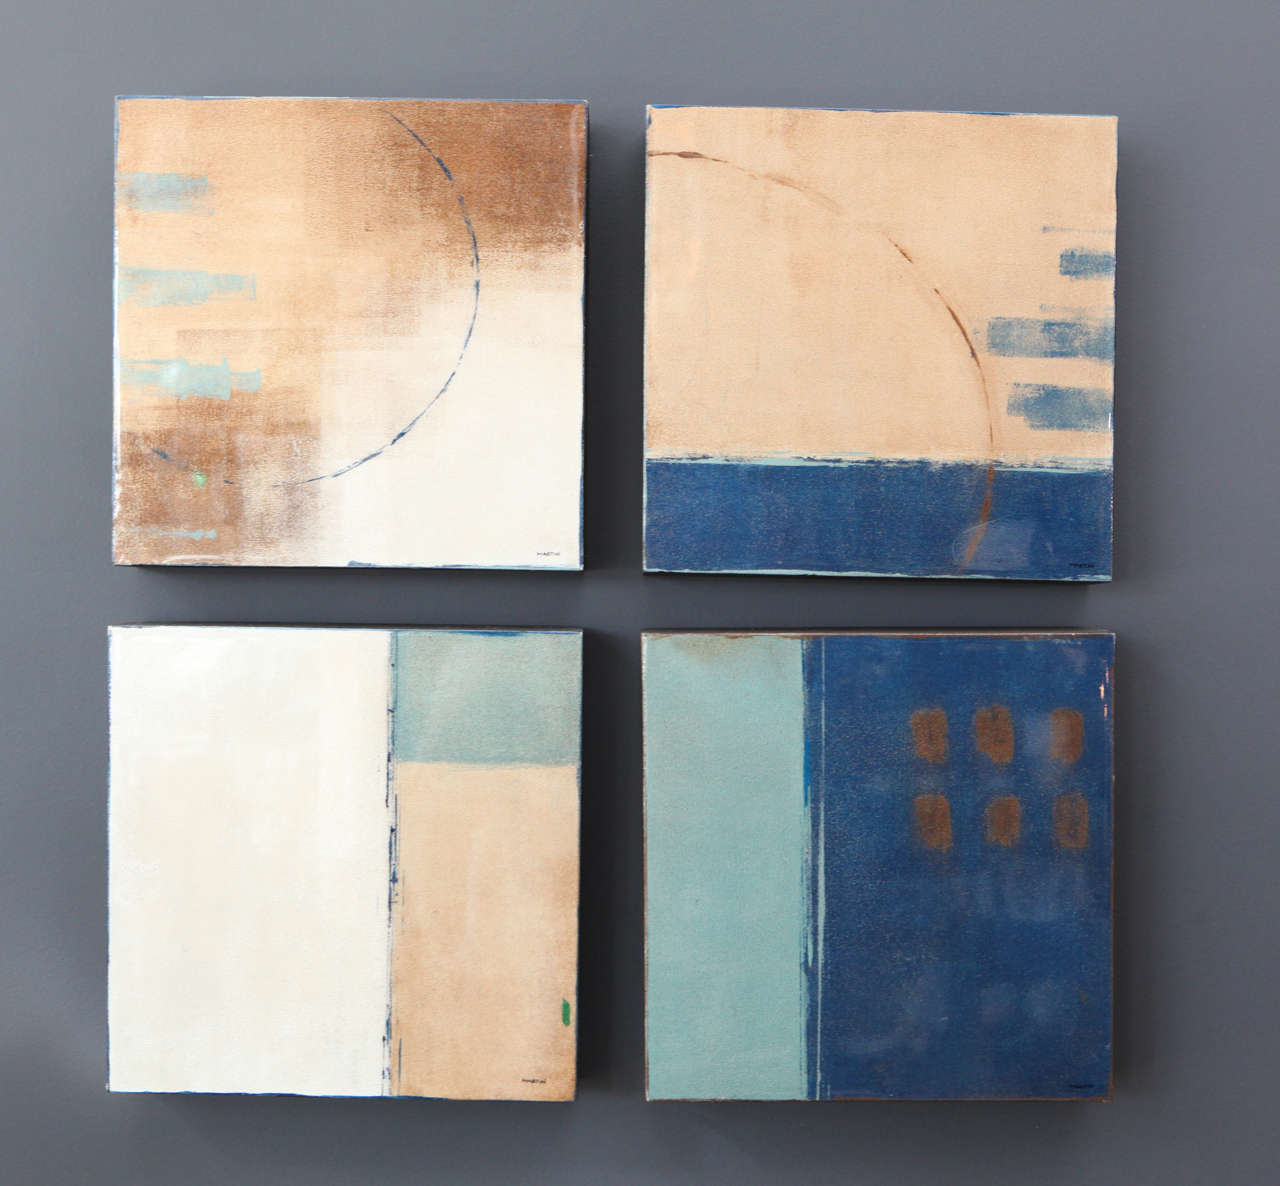 Set of 4 Genuine Martin Panels in shades of blue and gold, with a lacquer finish.